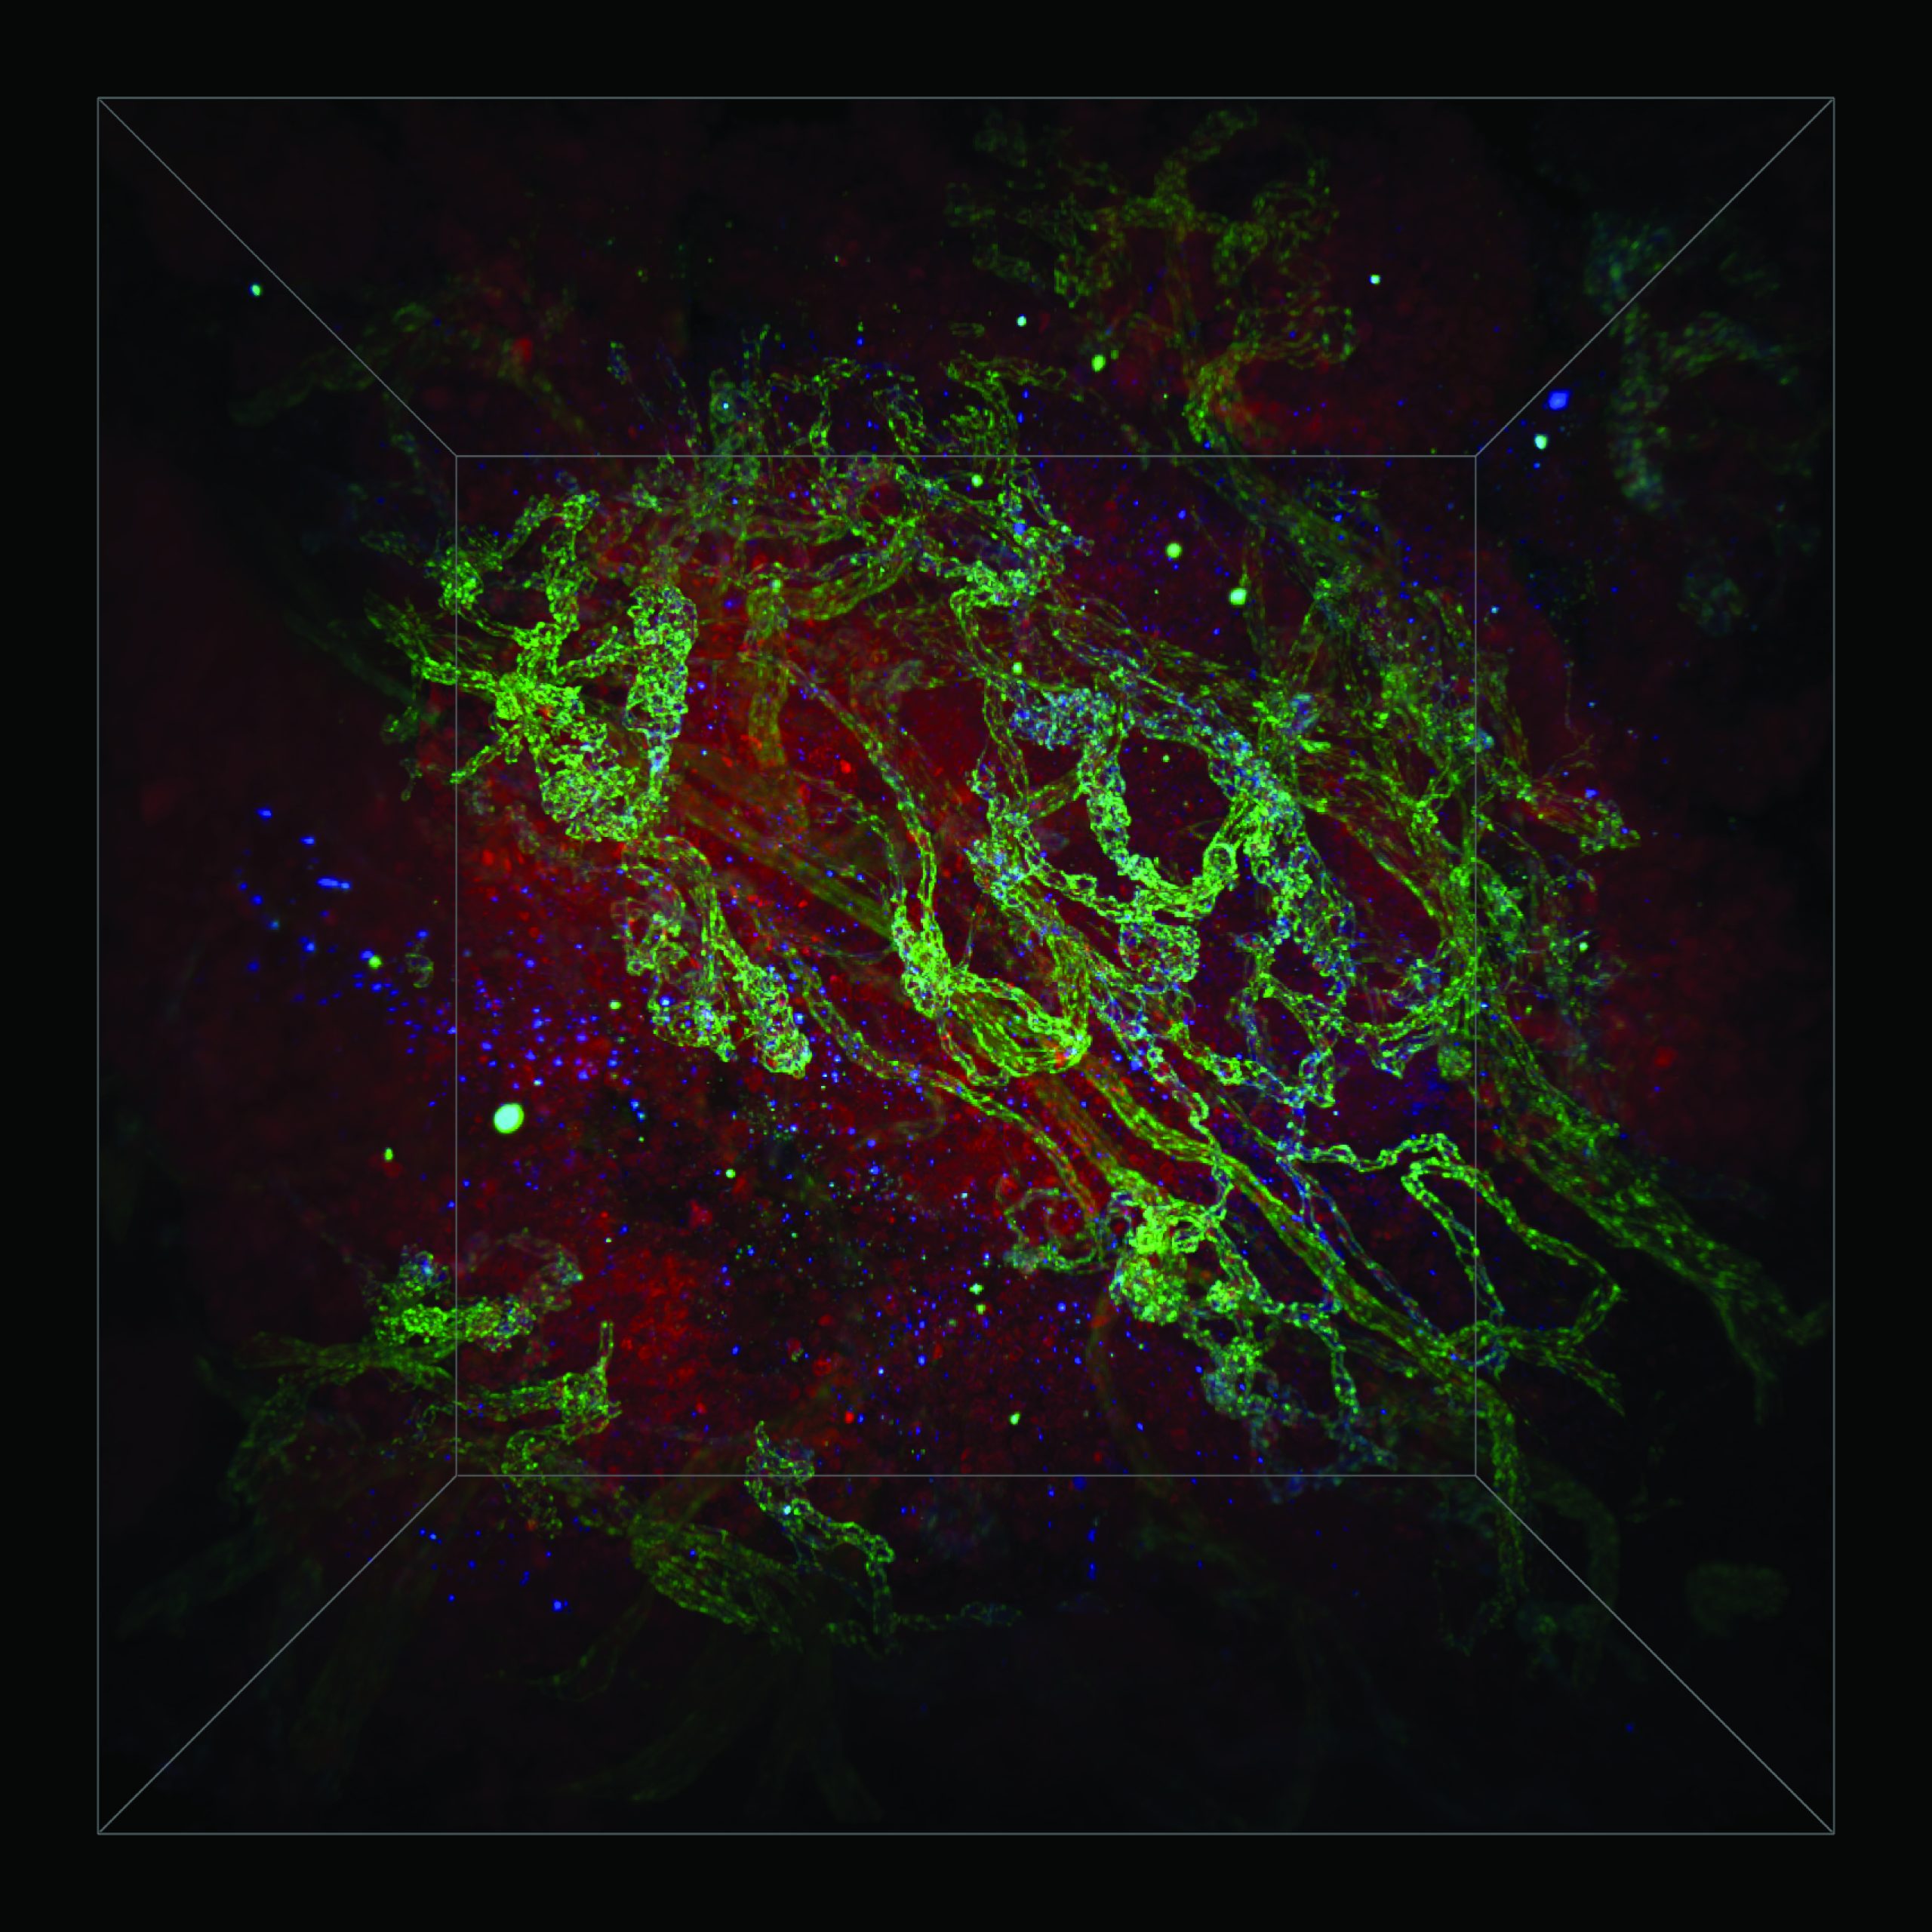 A photograph of bright green and blue streaks reveal blood vessels that are surrounded by a red clouds of tumour cells which form a cosmic landscape when viewing an ovarian tumour sample under a microscope.